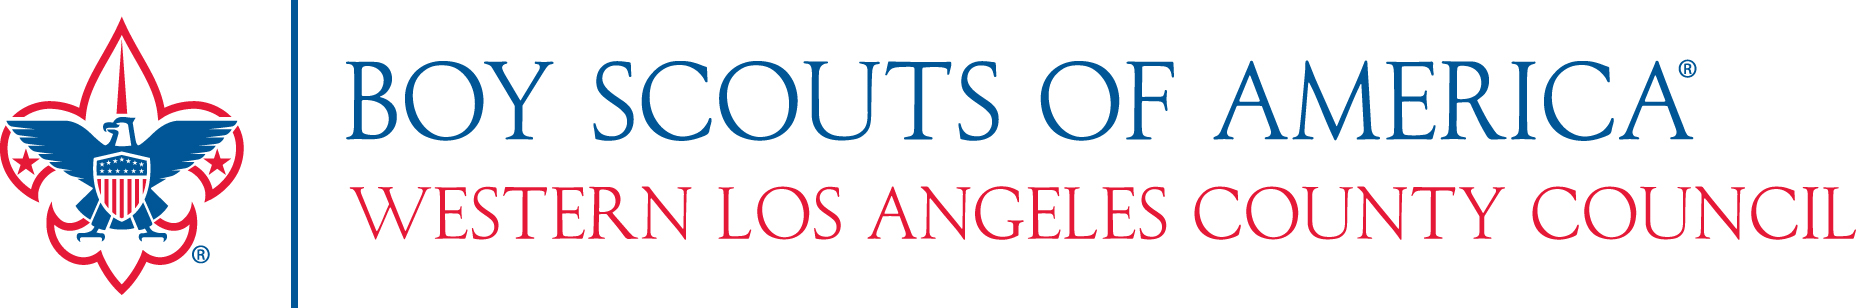 Boy Scouts of America, Western Los Angeles County Council